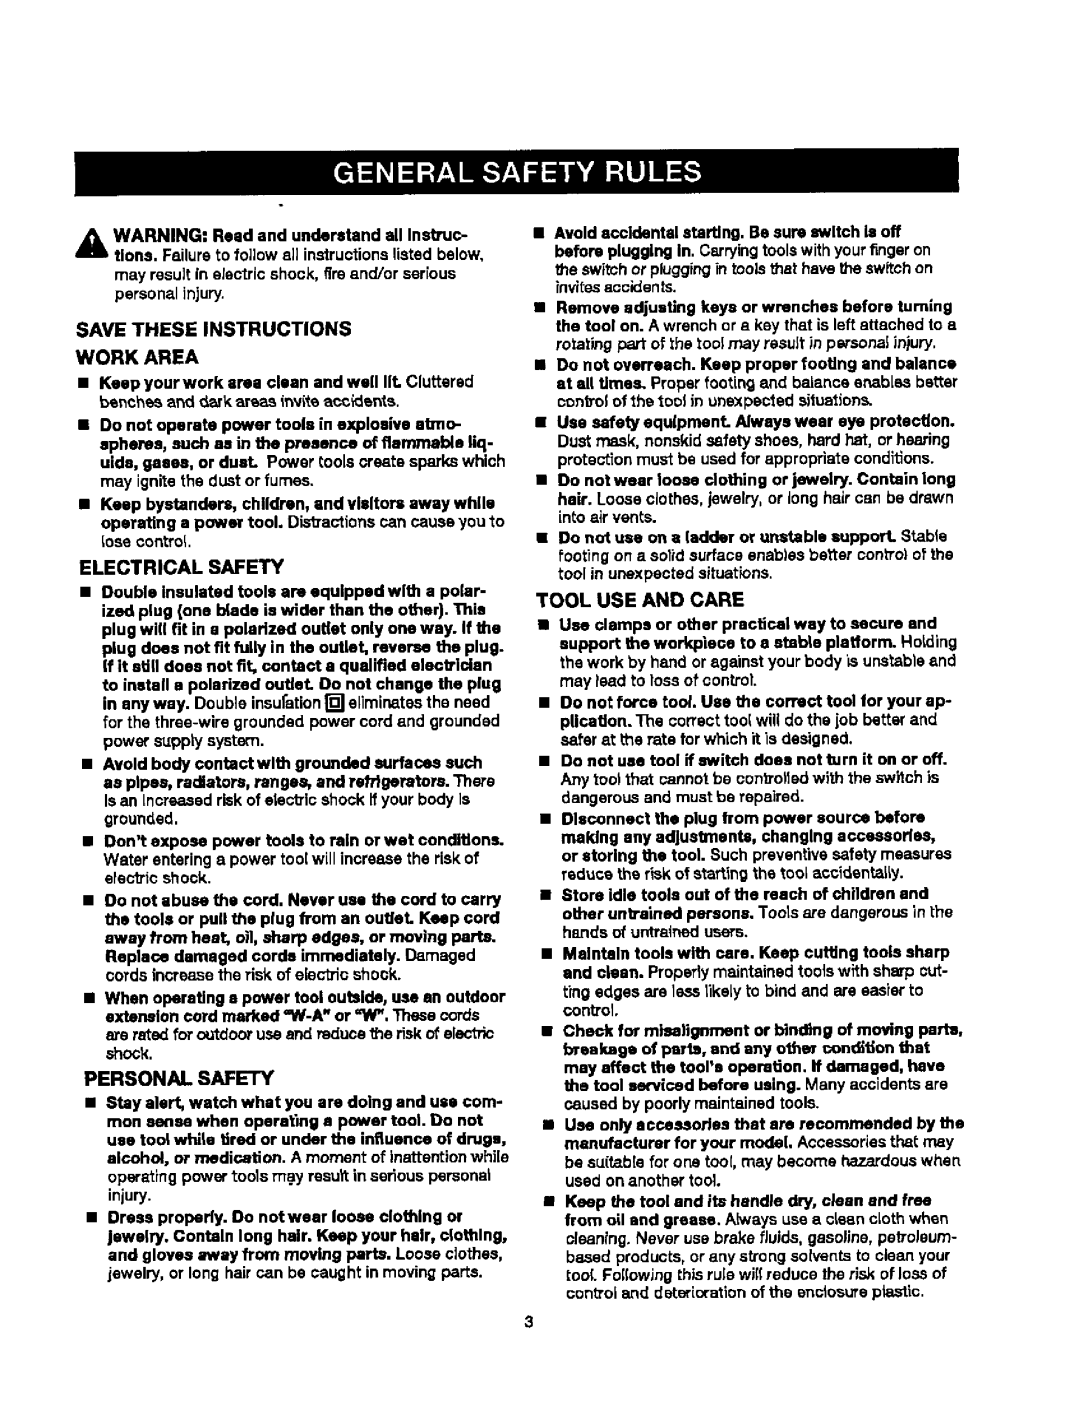 Craftsman 315.27984 manual Electrical Safety, Personal Safety 